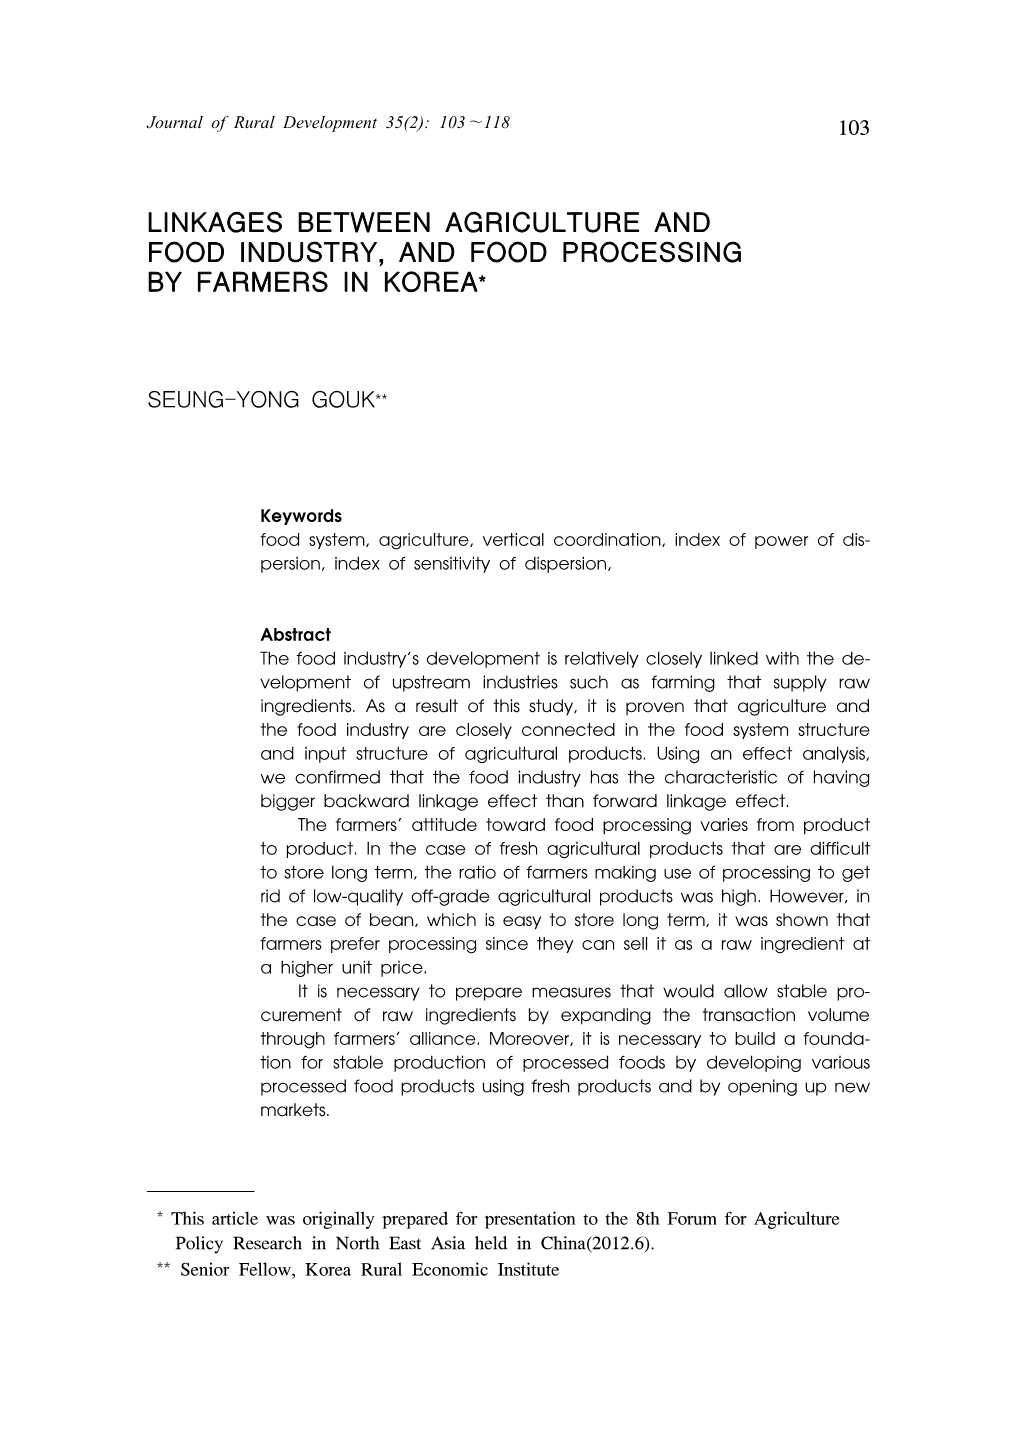 Linkages Between Agriculture and Food Industry, and Food Processing by Farmers in Korea*